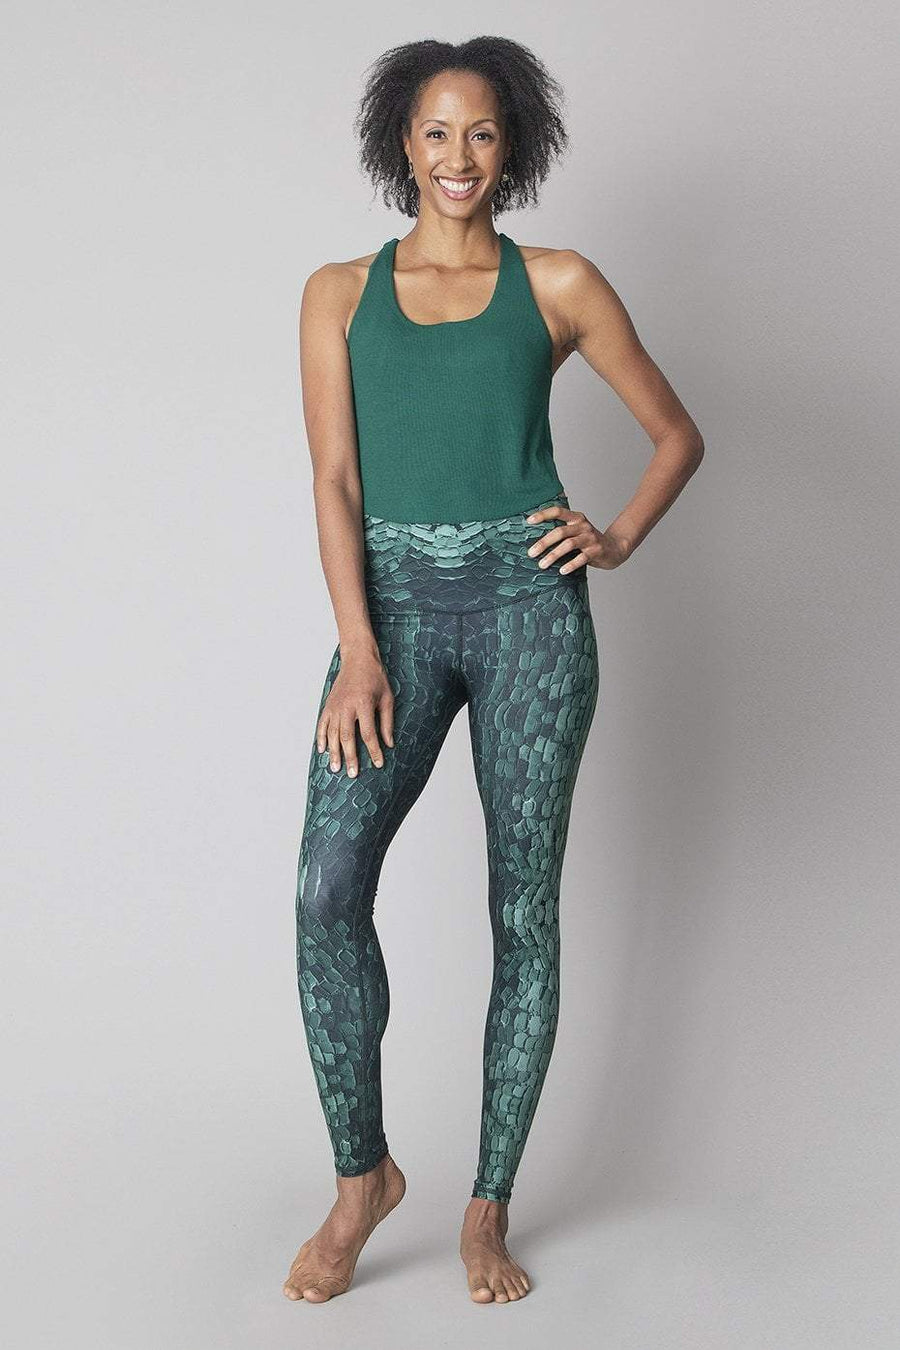 New Lululemon Wunder Under Tight Low Rise Thrive Veridian Green